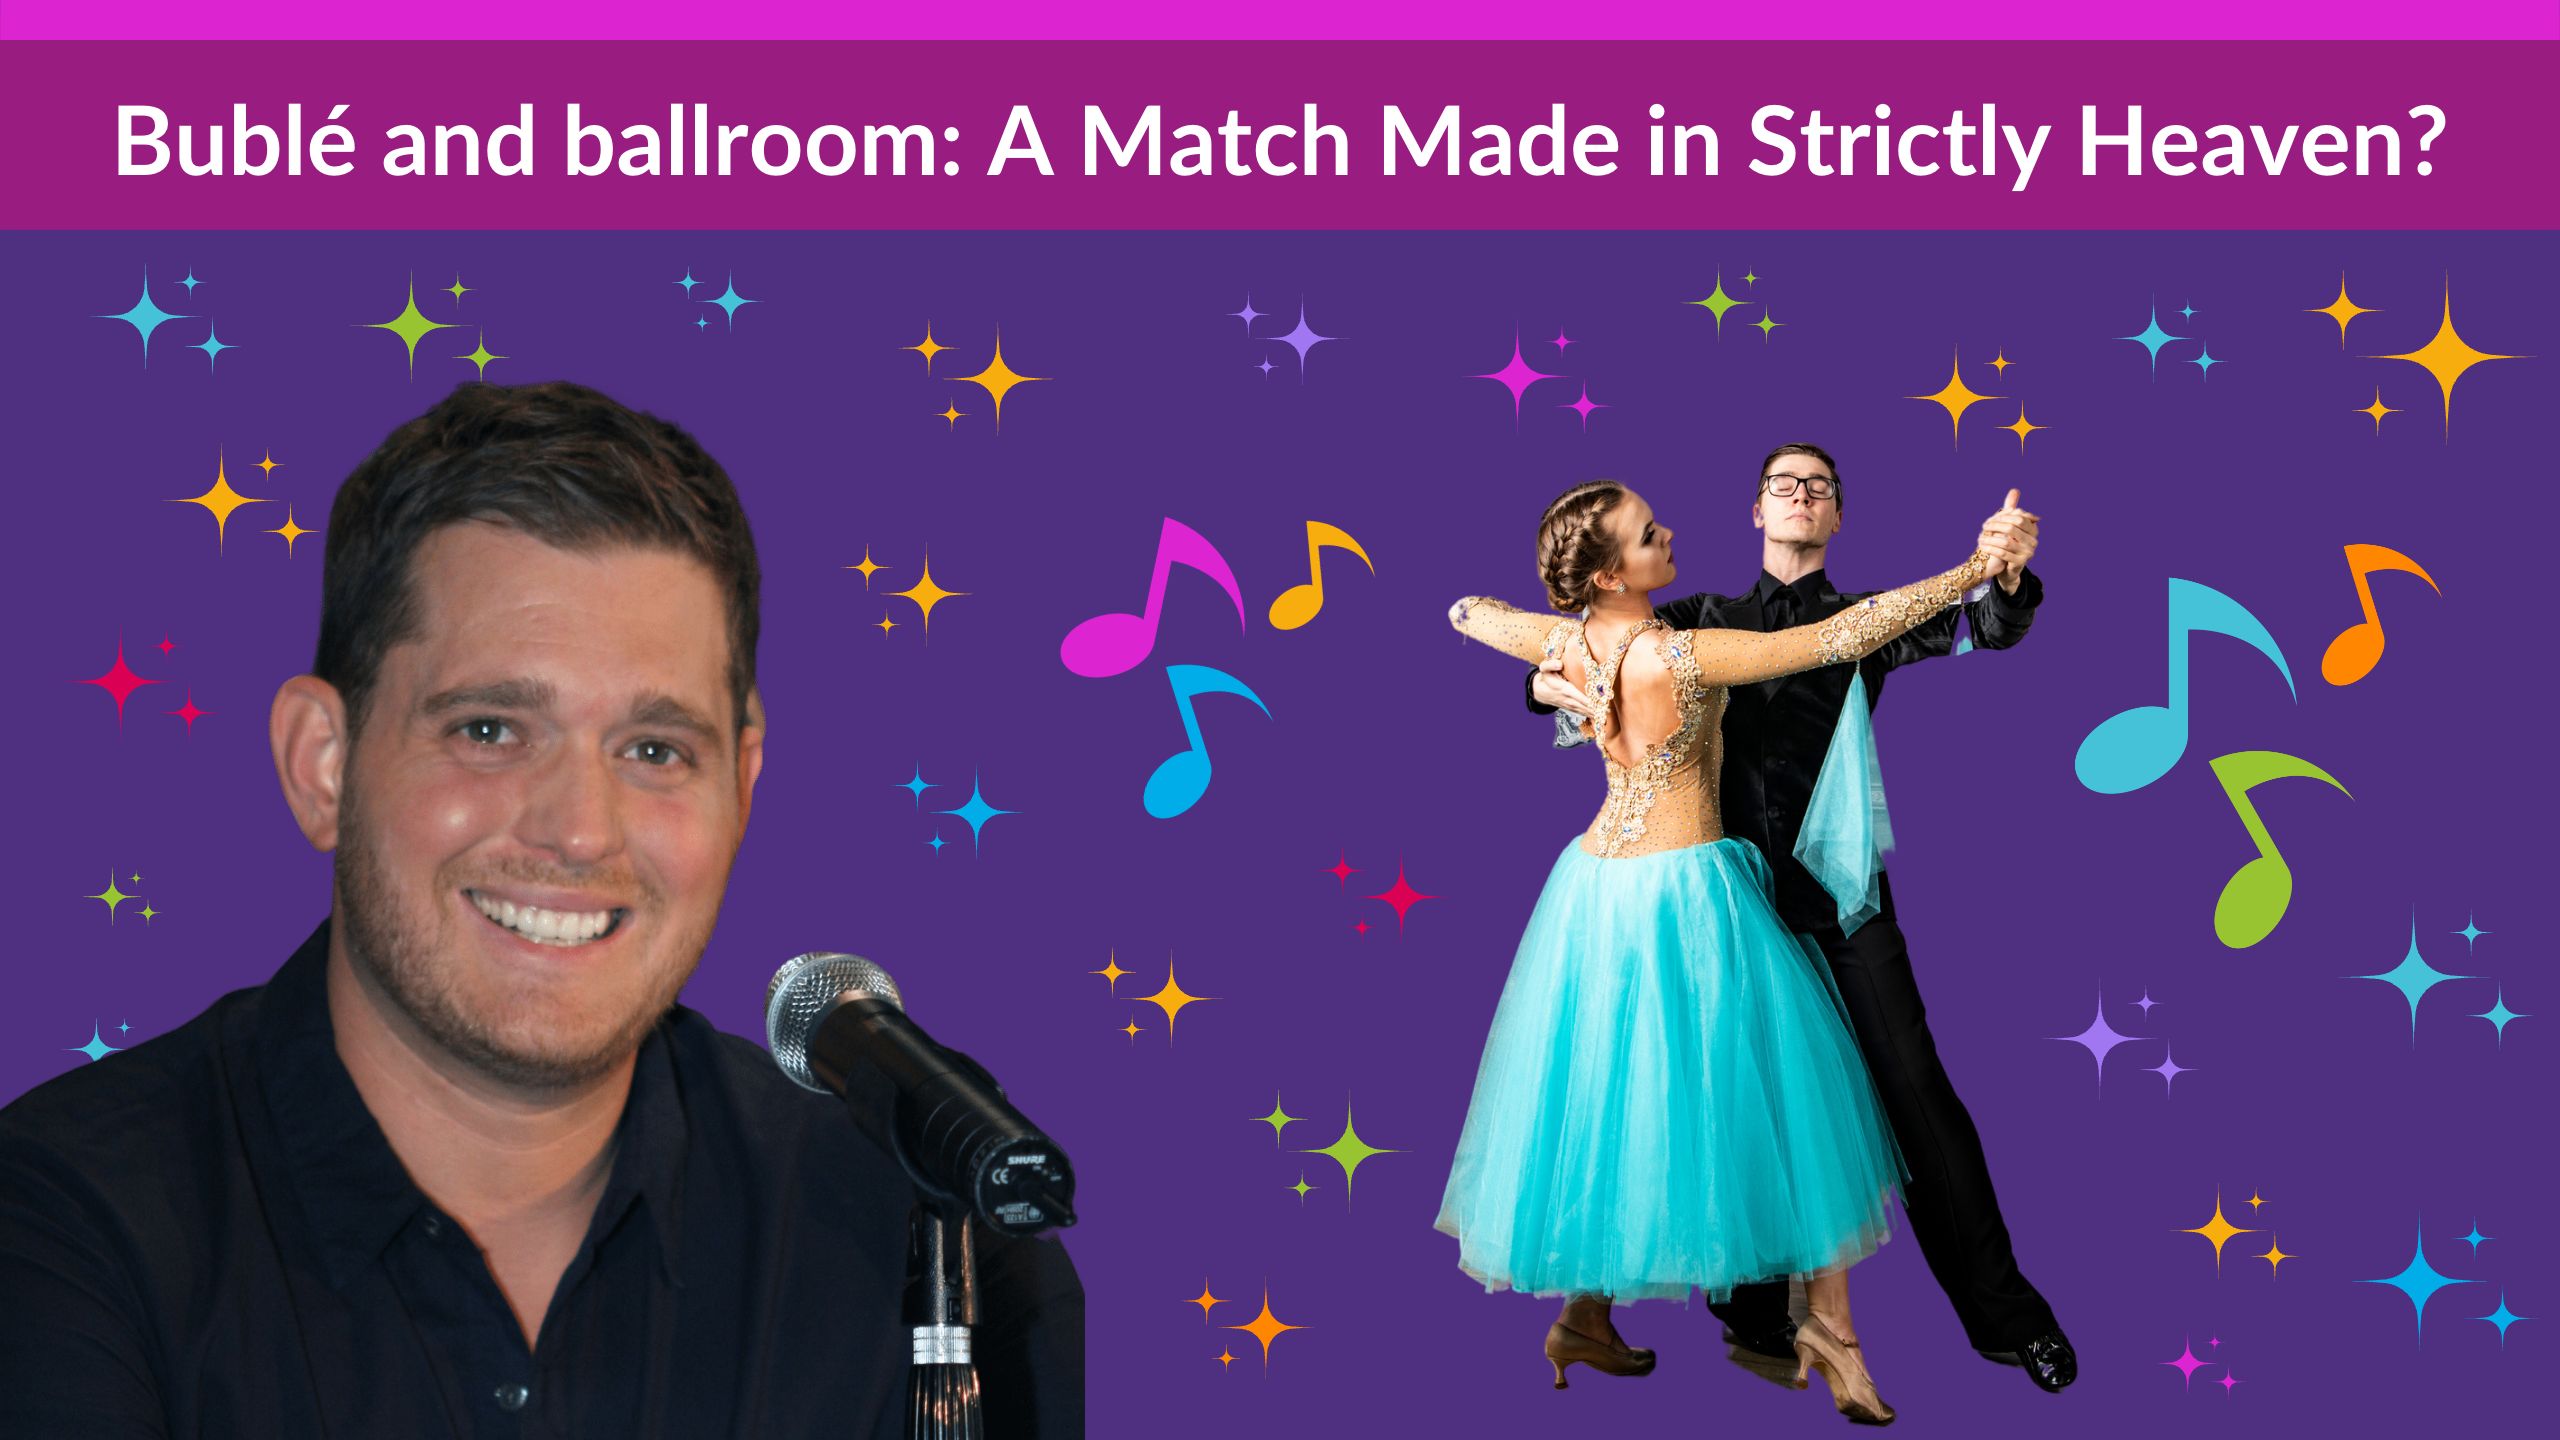 Graphic: Michael Buble and ballroom dancers